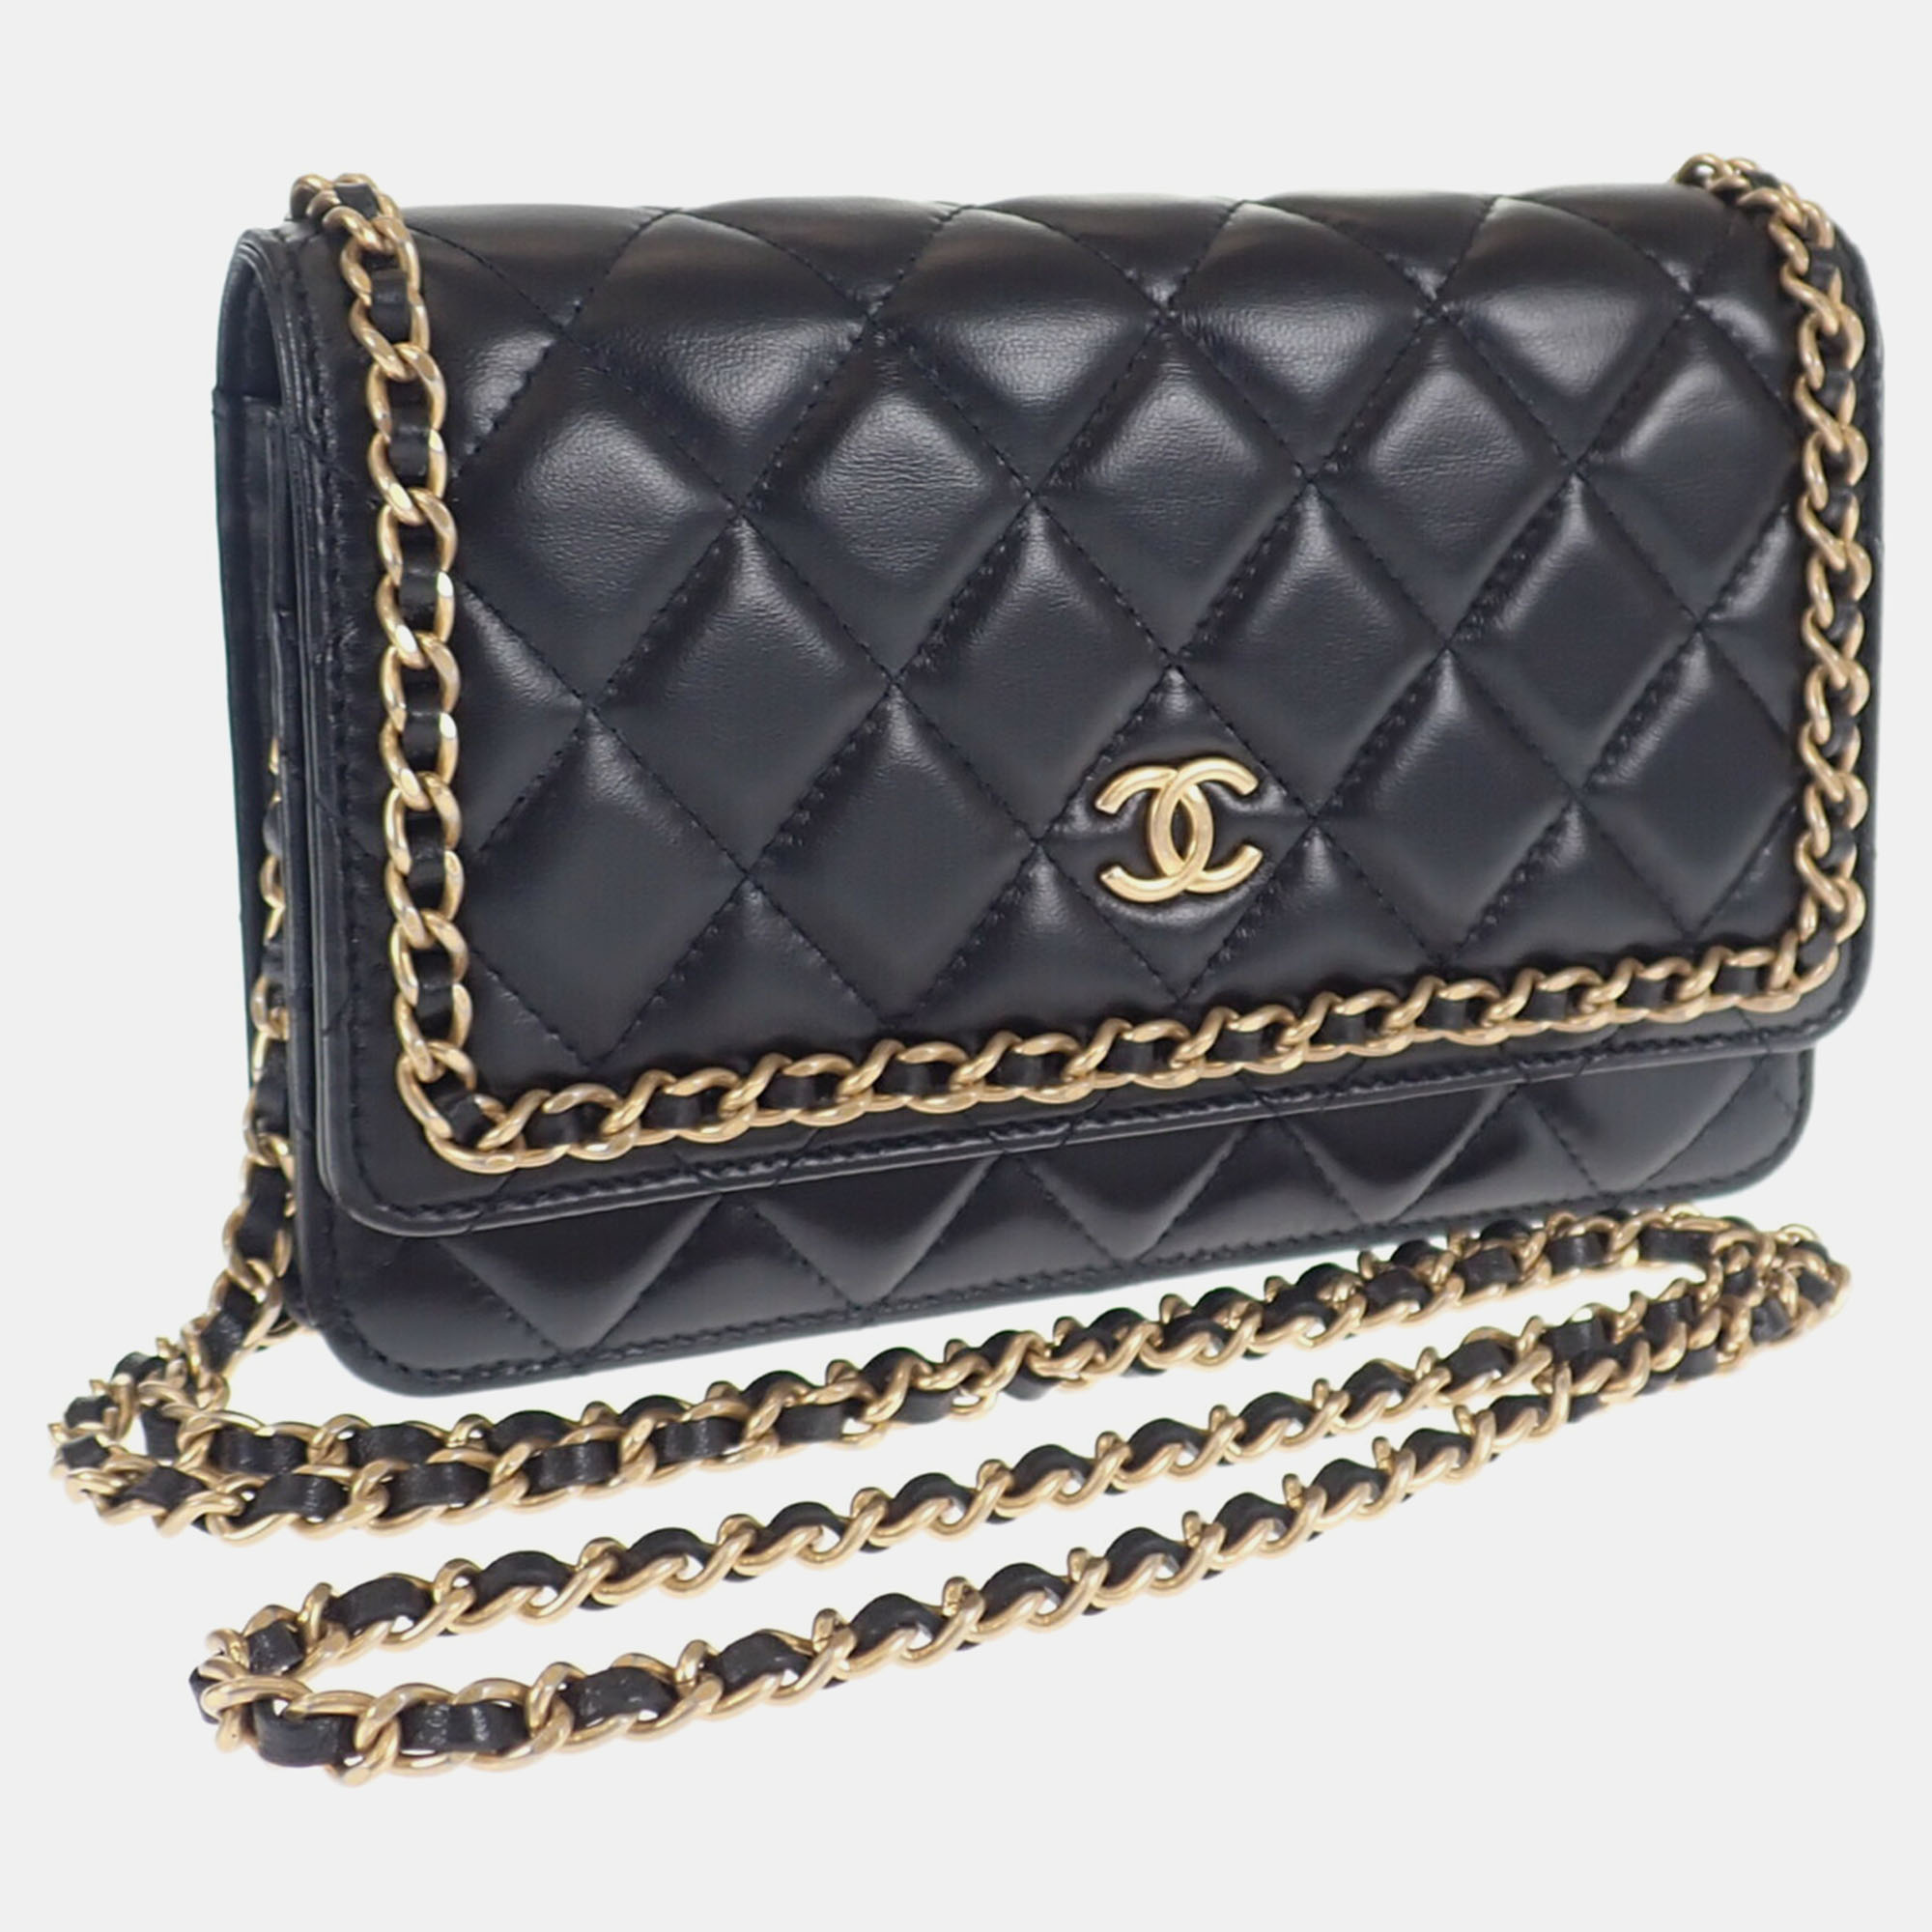 Chanel black leather cc quilted chain around wallet on chain